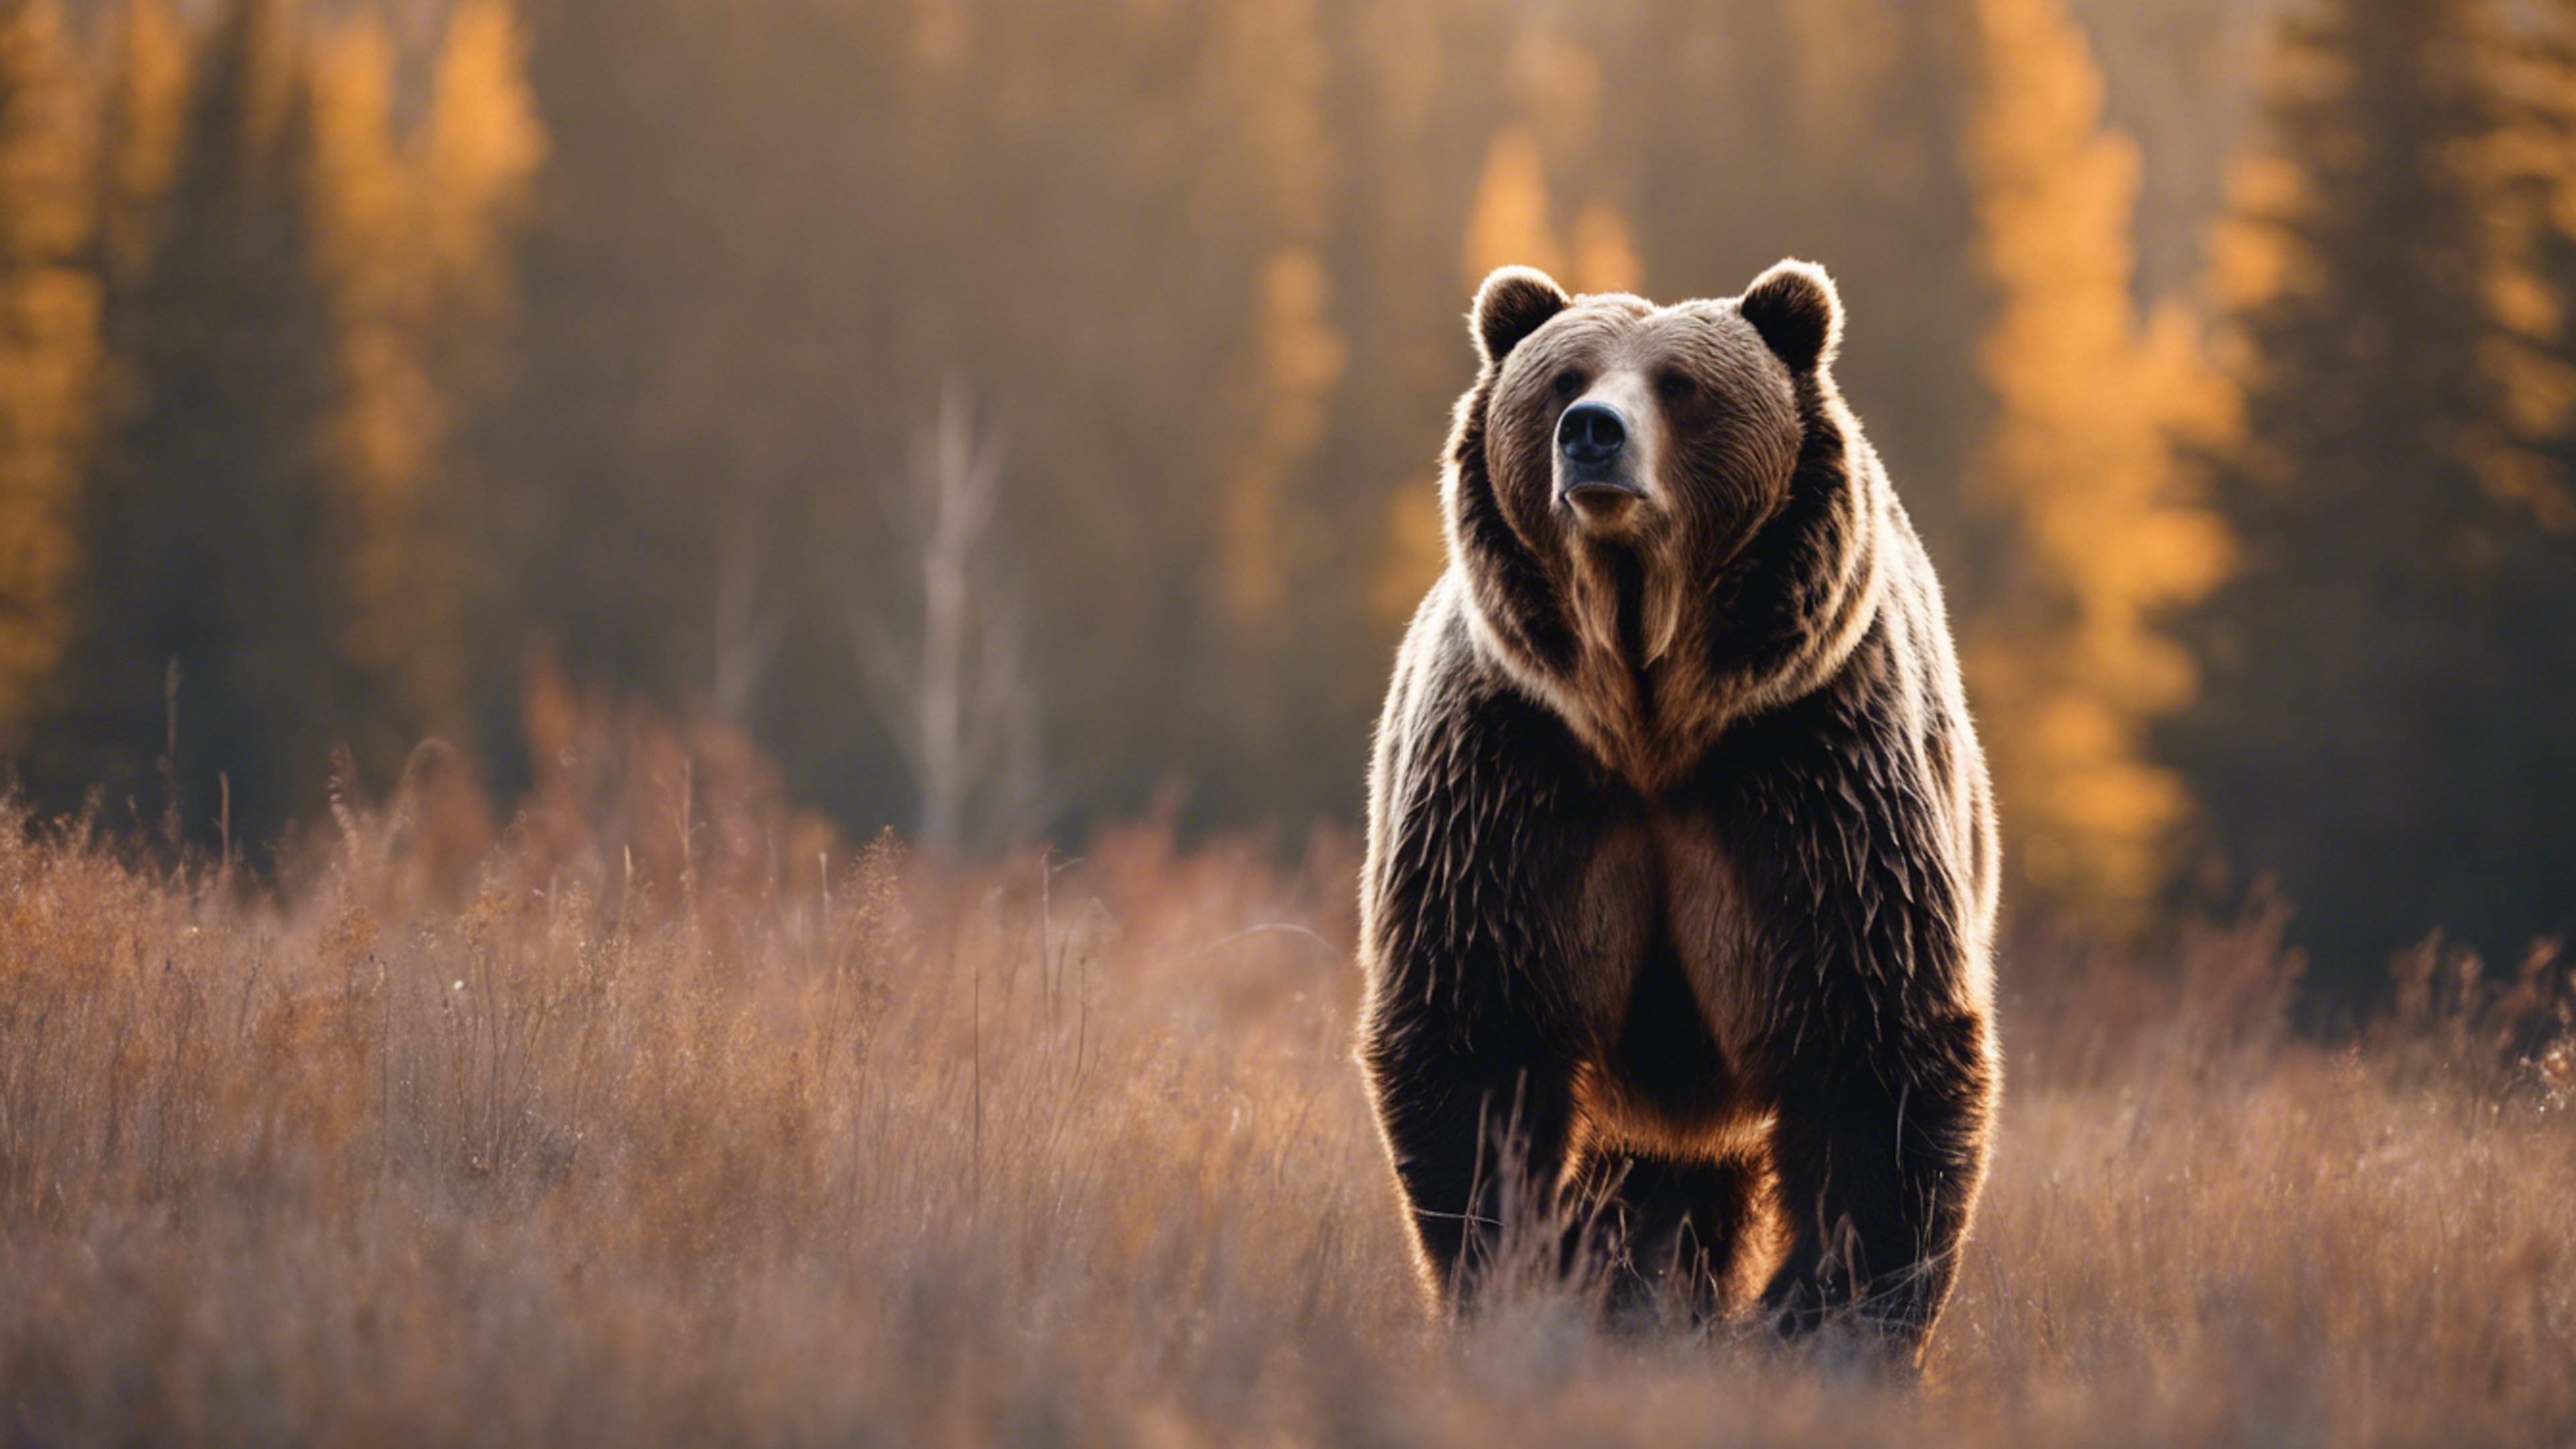 A majestic brown grizzly bear standing tall in the wild Hintergrund[4fb1e3b24f2c4984aff0]